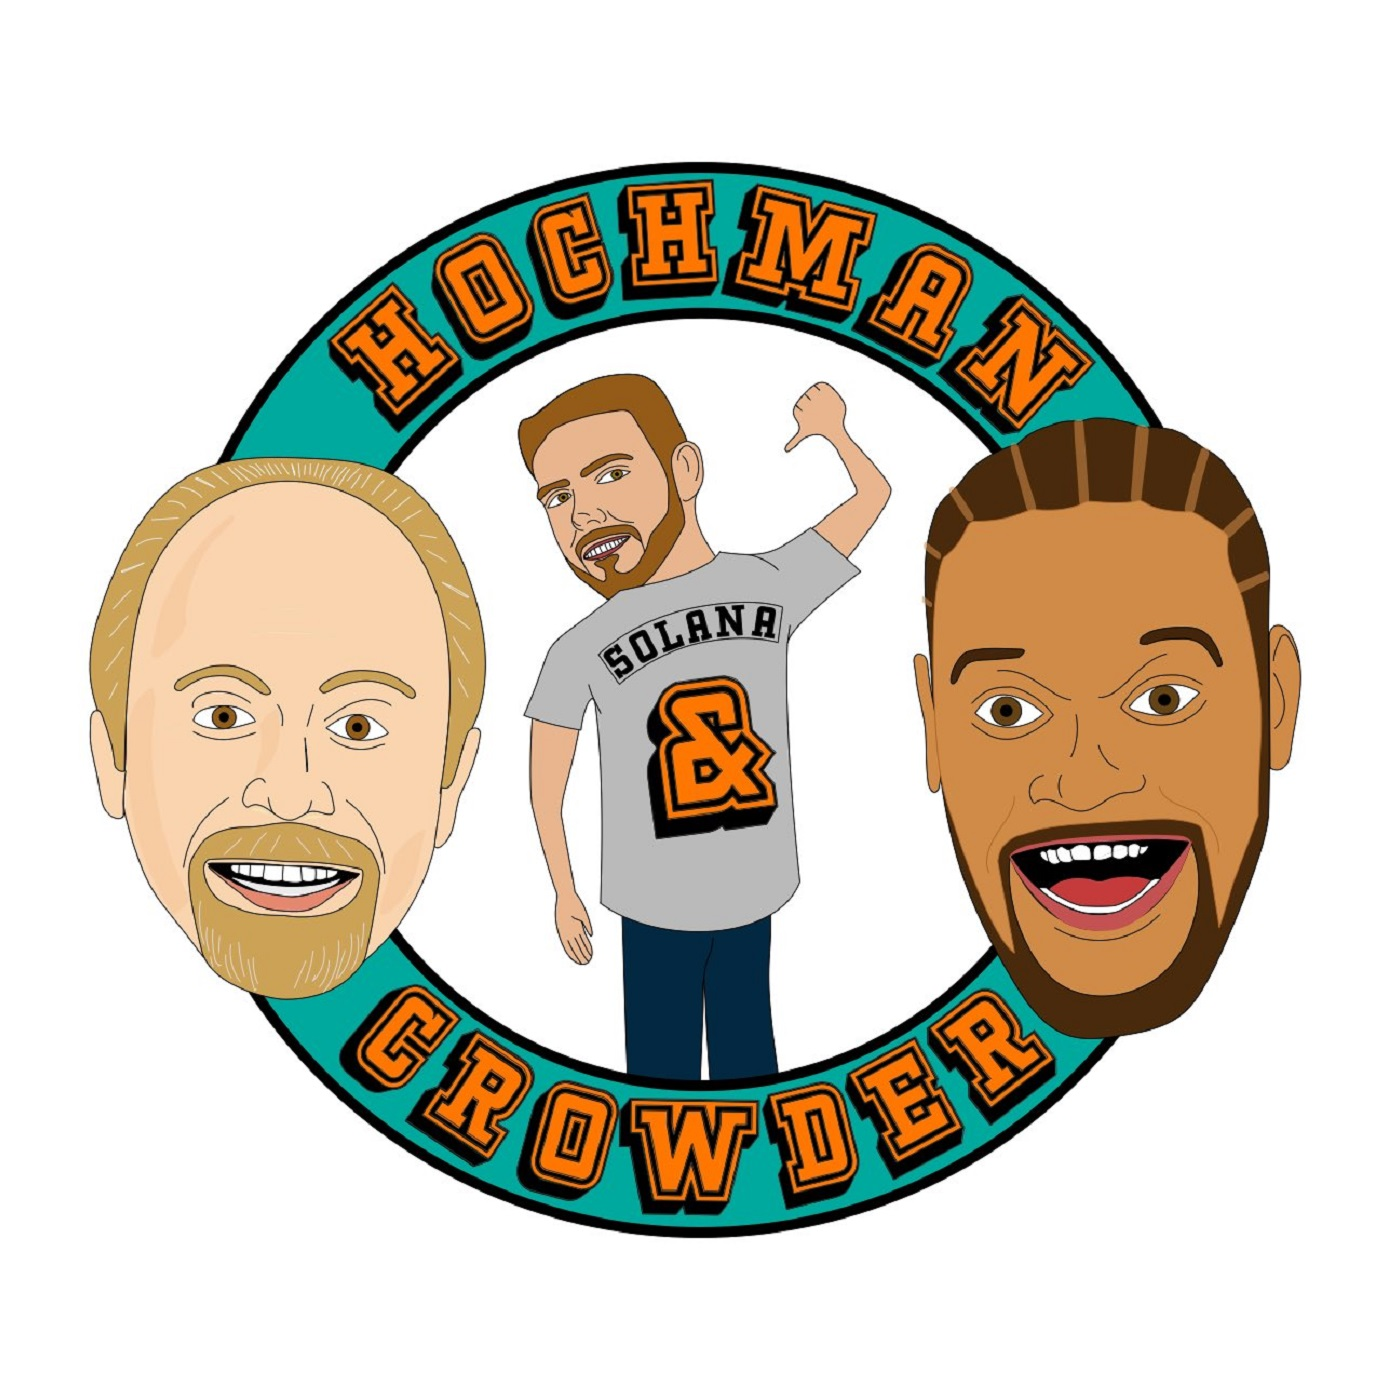 07-09-2019 - Hoch and Crowder Podcast Hour 3